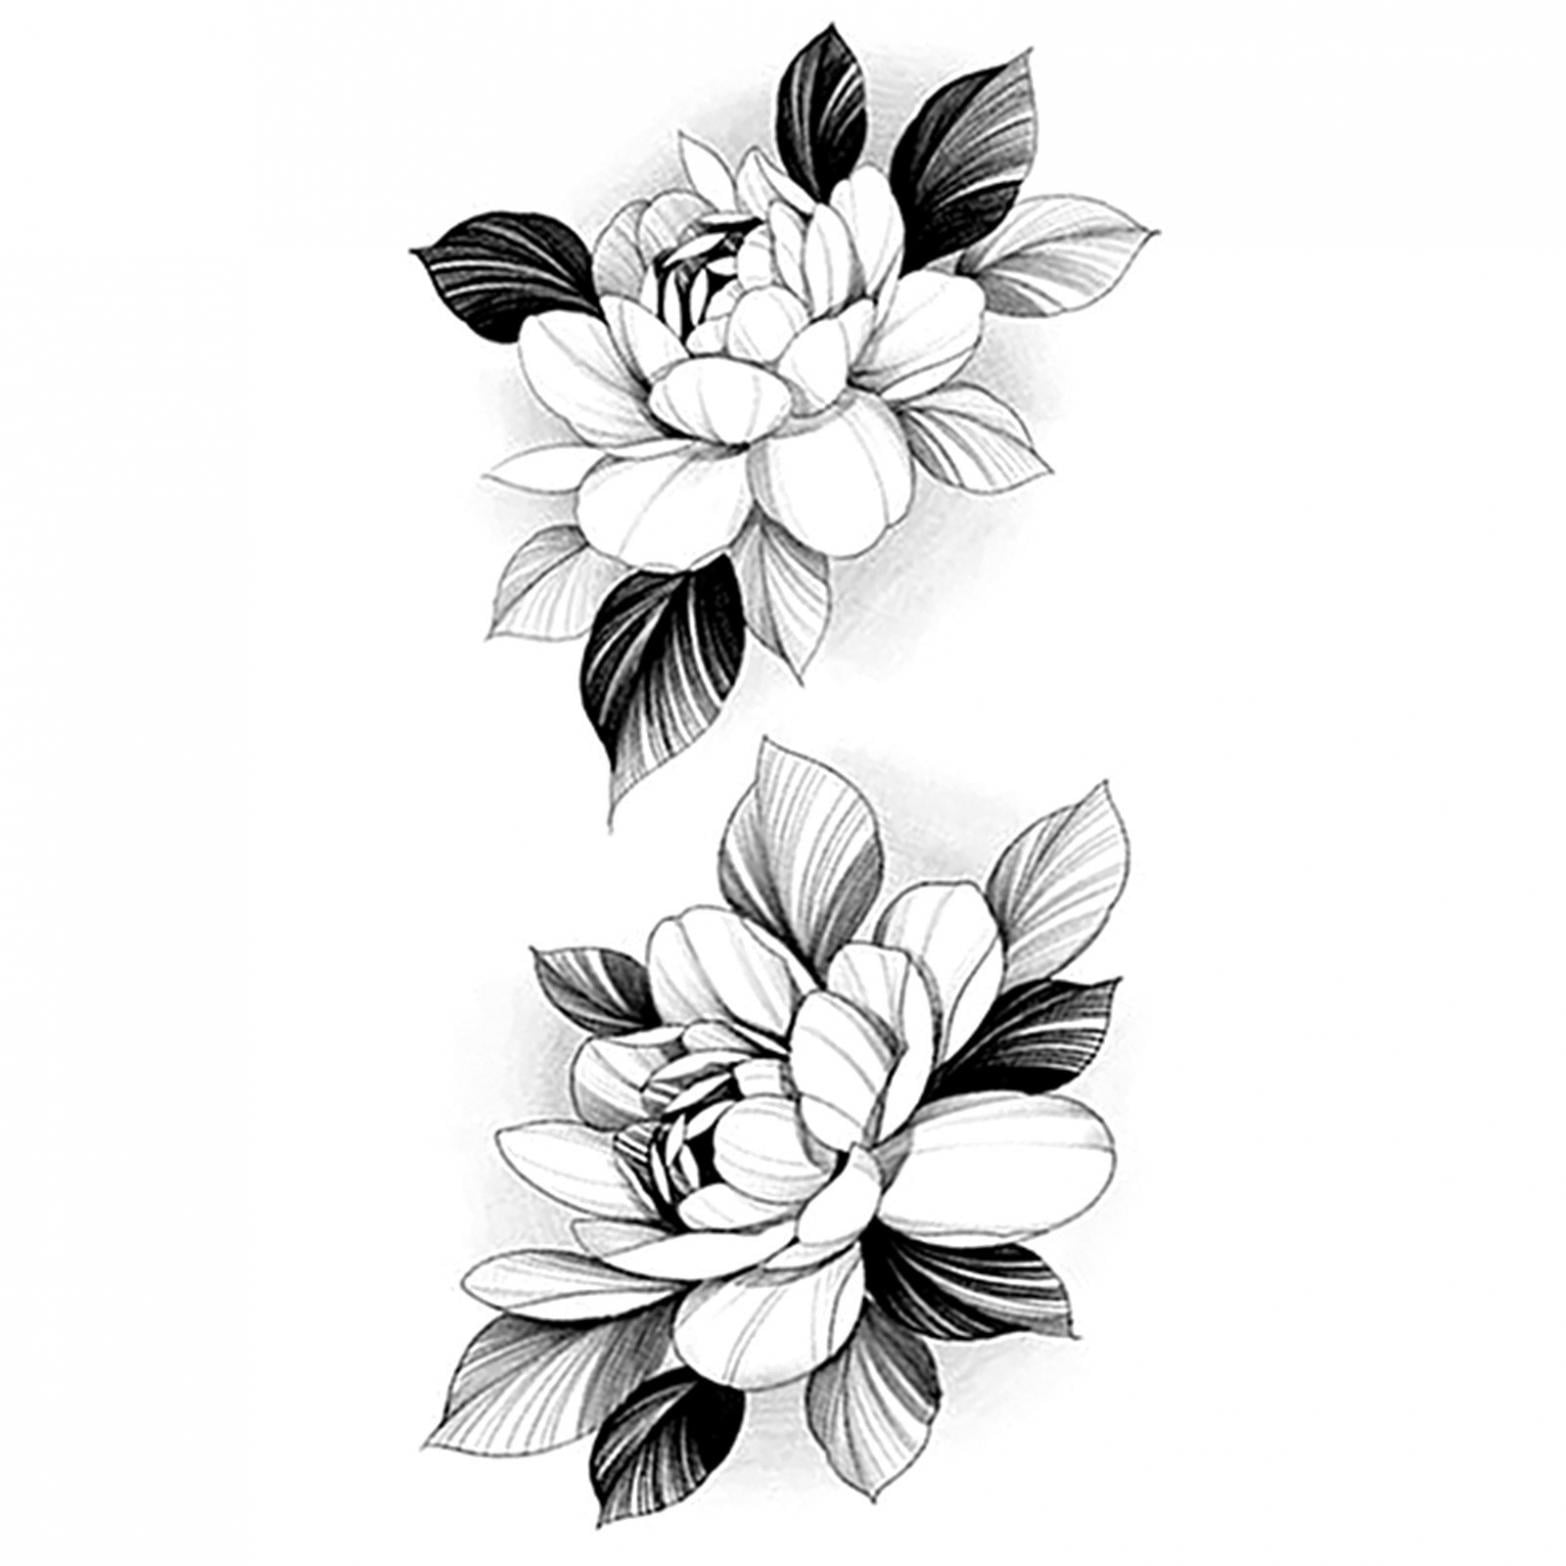 Qisiwole Temporary Tattoos for Women, Black Rose Flower Tattoos Stickers Waterproof Temporary Tattoos Decals for Adult, Body Art Arm Chest Sketch